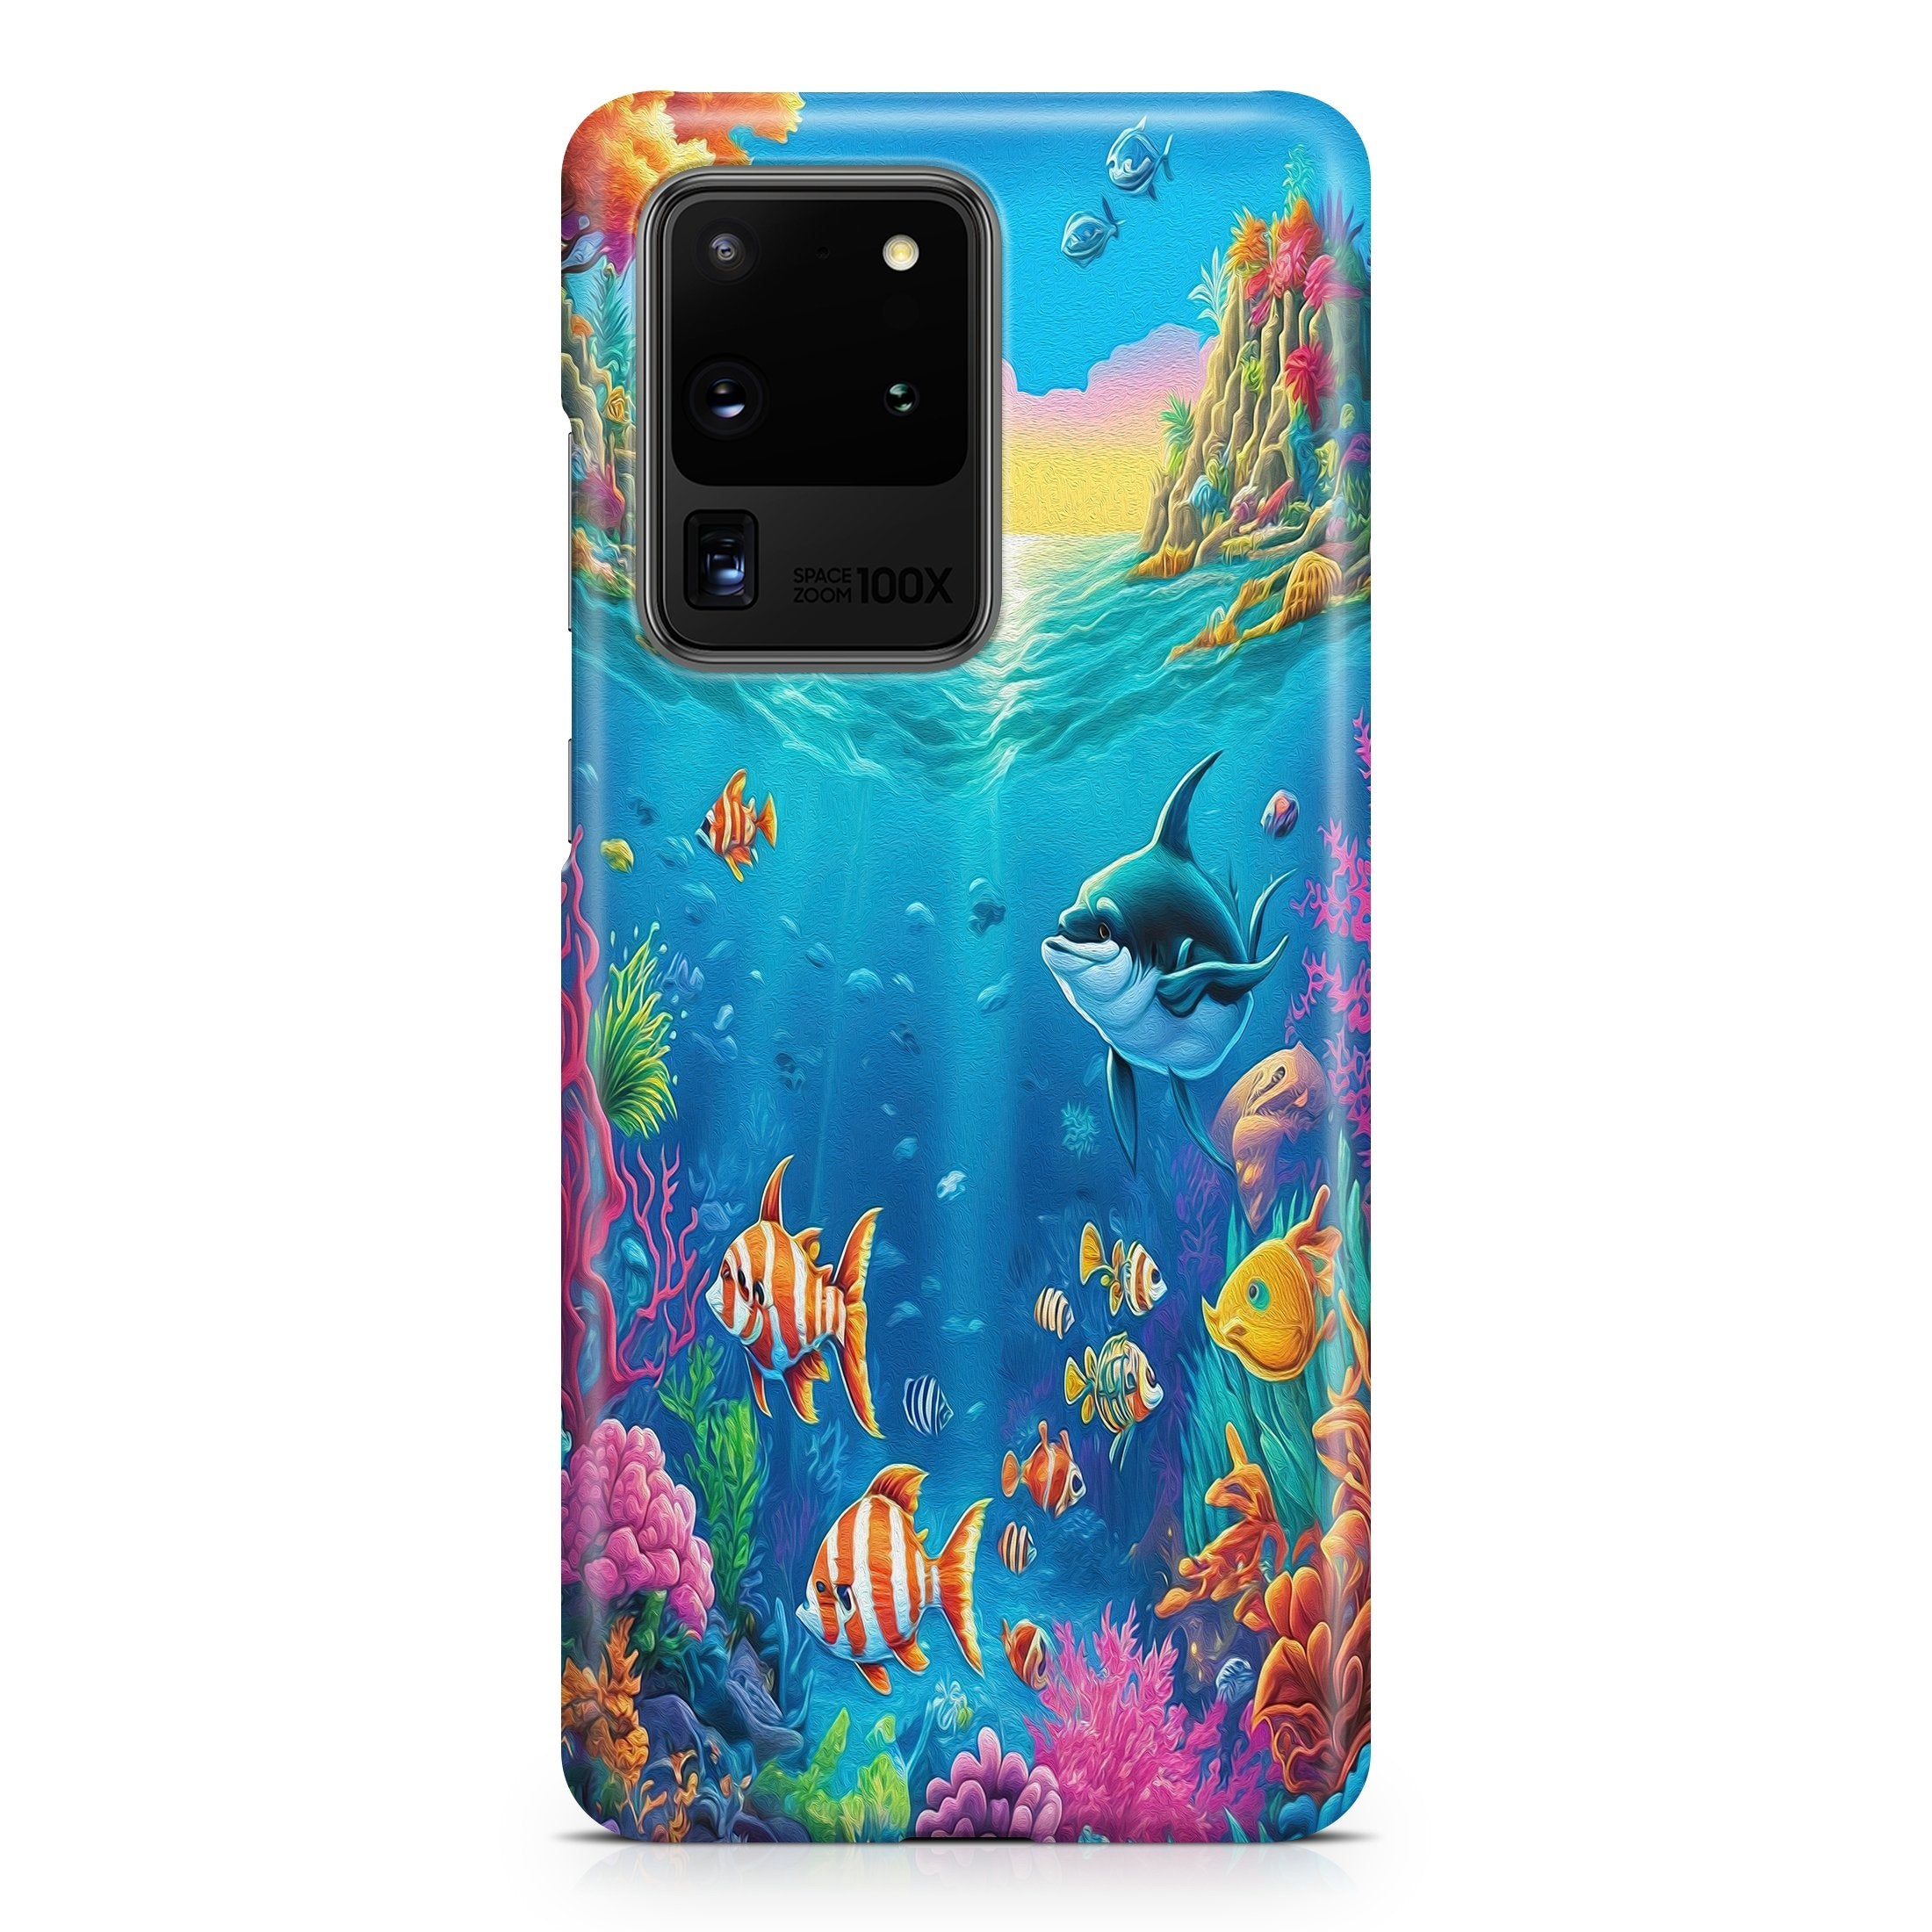 Under the Sea - Samsung phone case designs by CaseSwagger